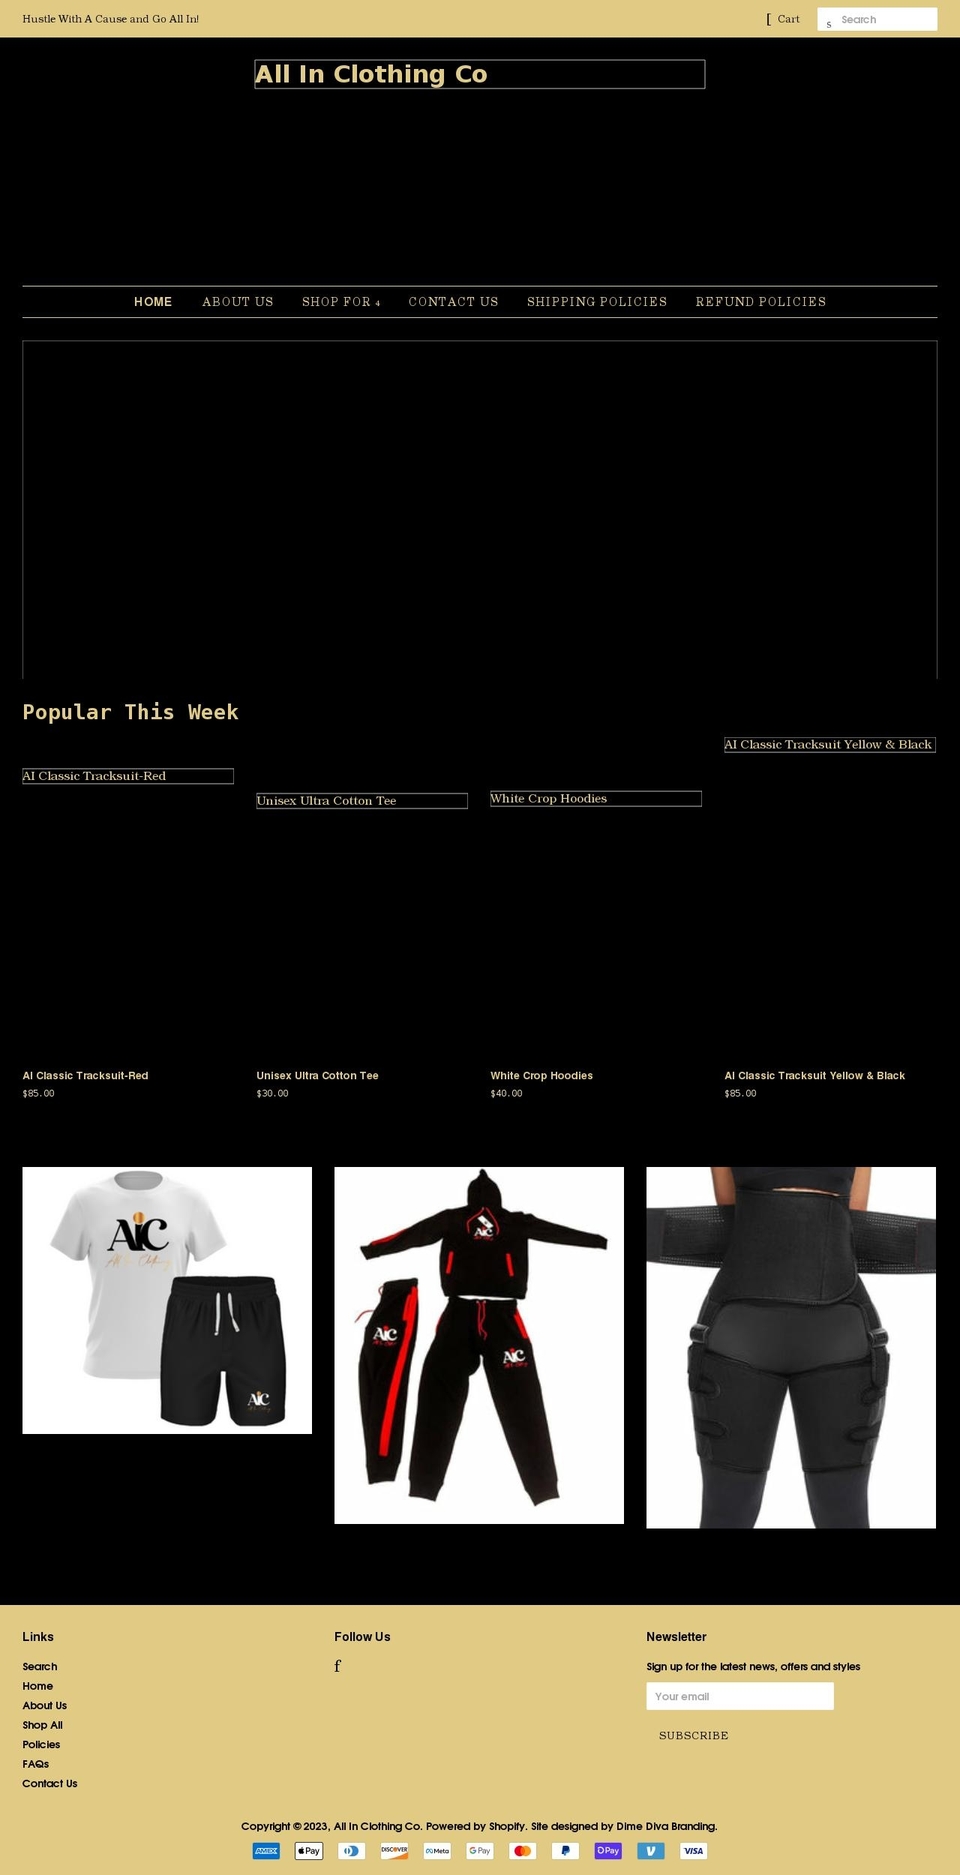 Lux Shopify theme site example allinclothingco.com